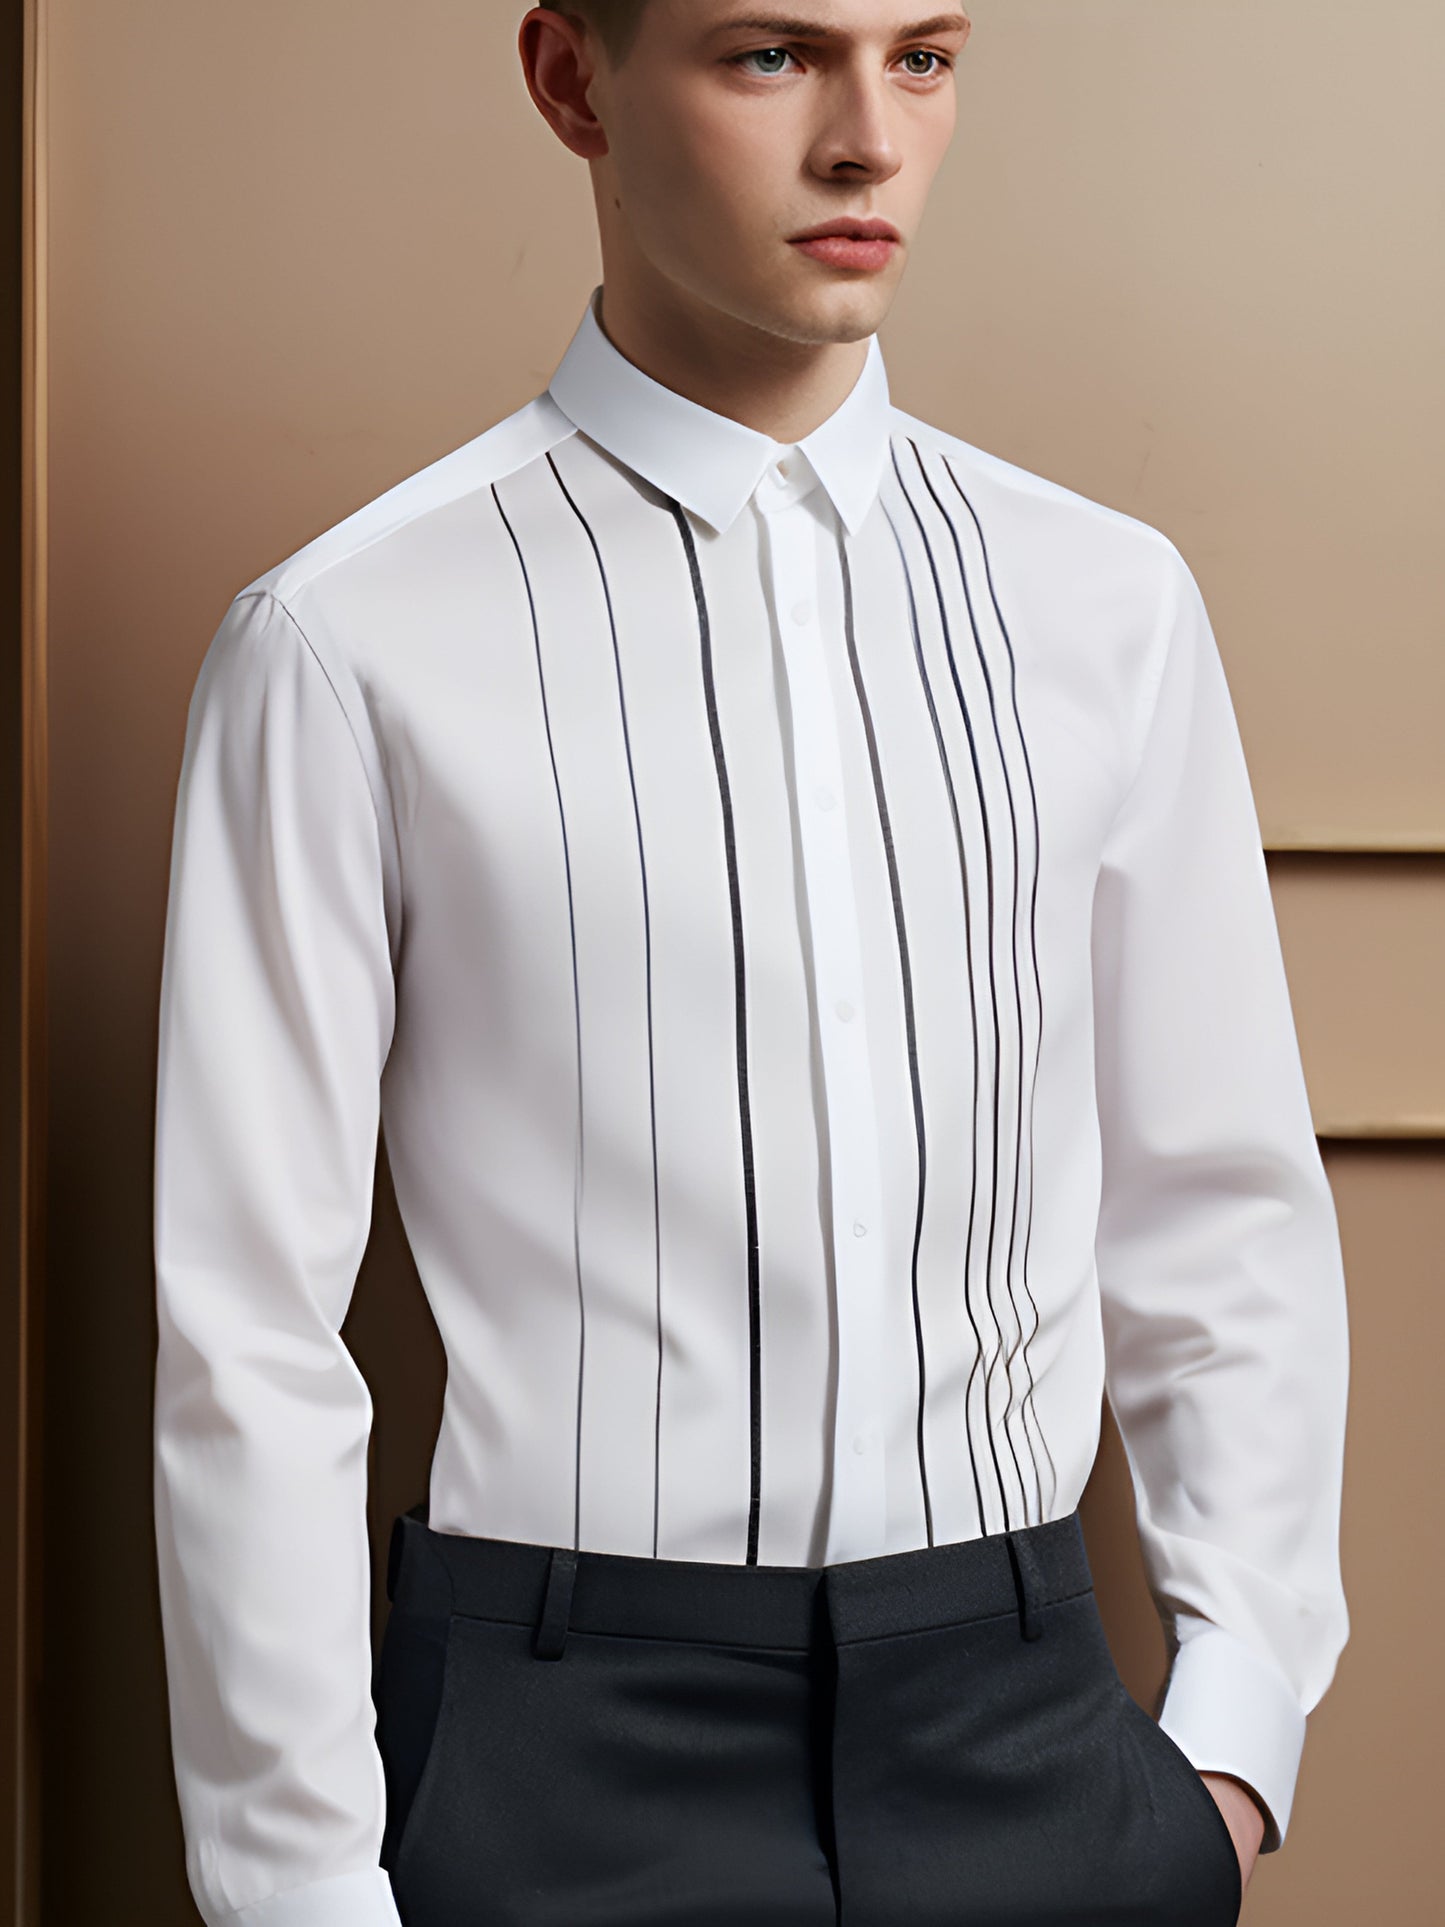 Embroidered Spread Collar Cotton Formal Shirt